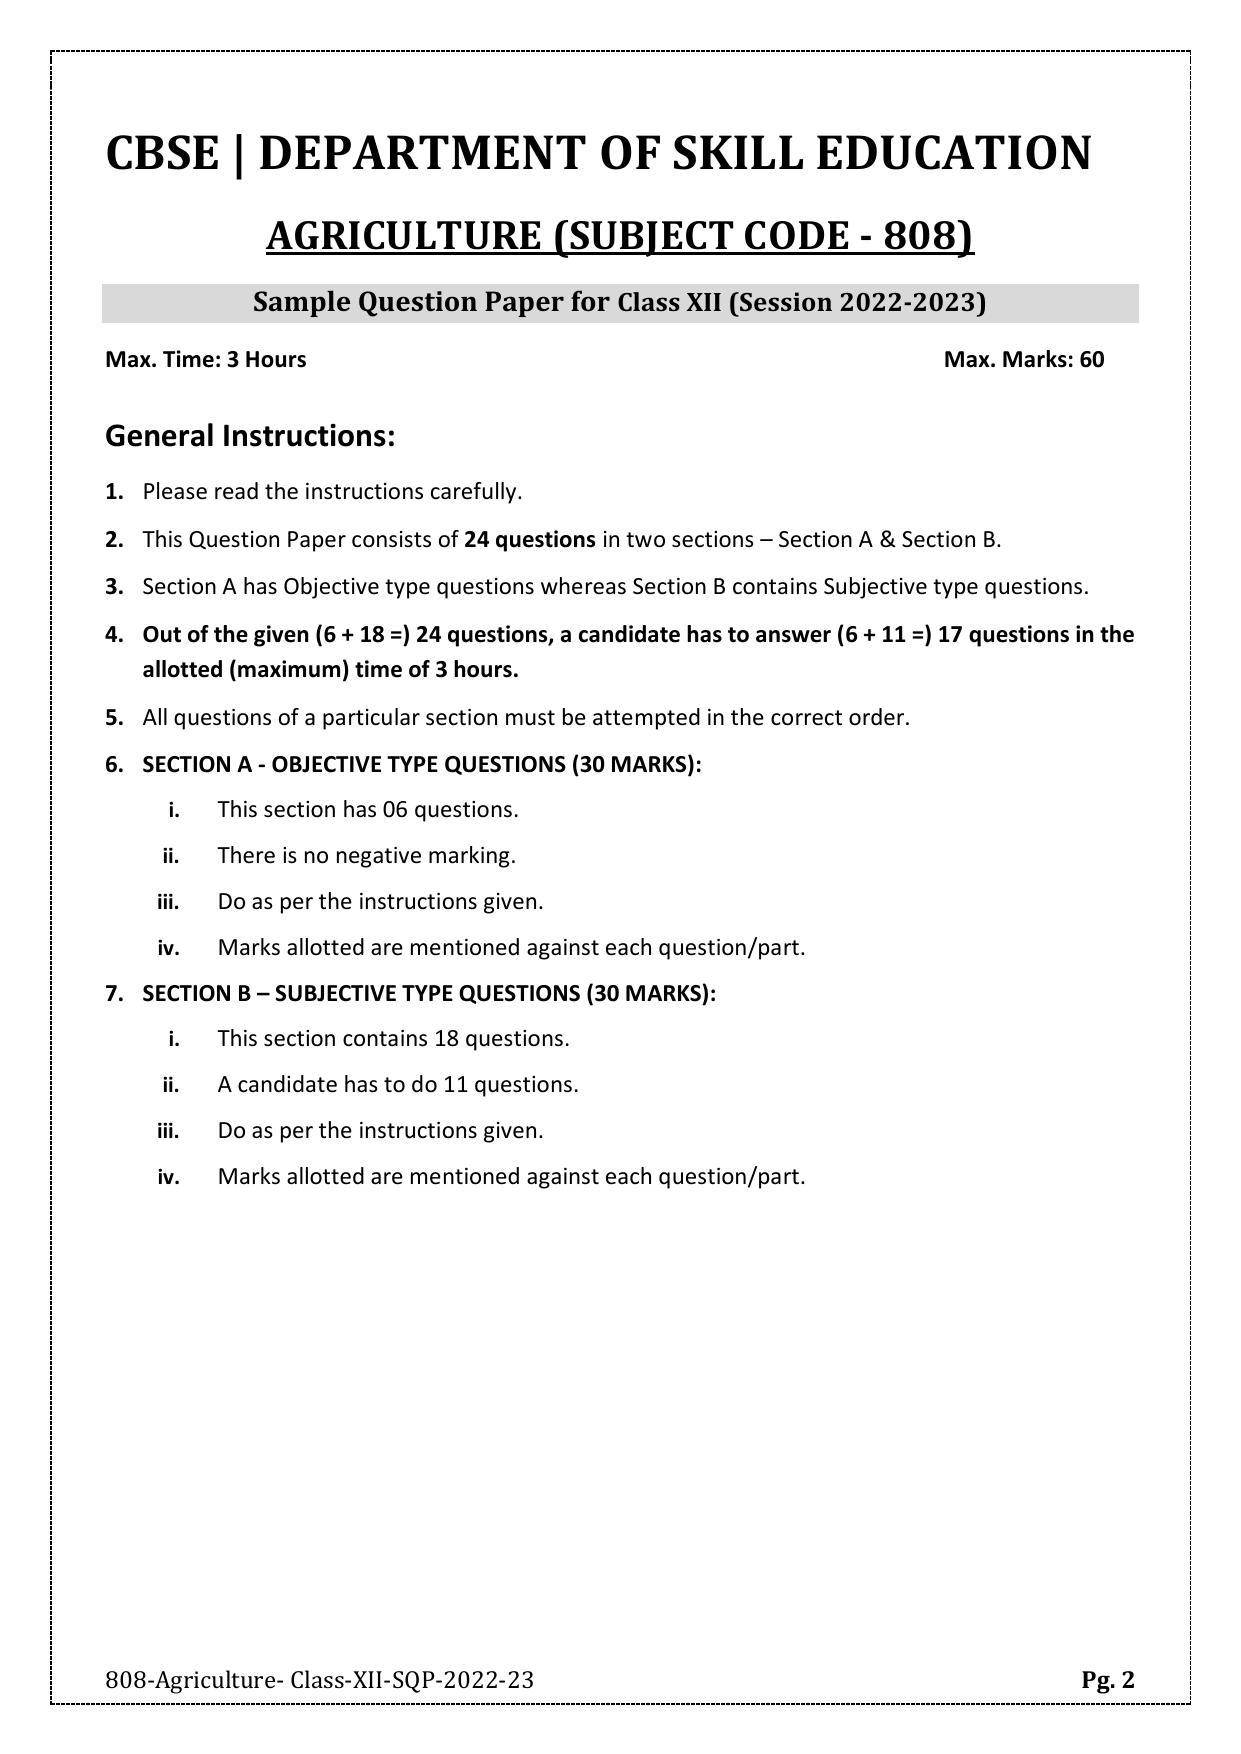 CBSE Class 12 Agriculture (Skill Education) Sample Papers 2023 - Page 2